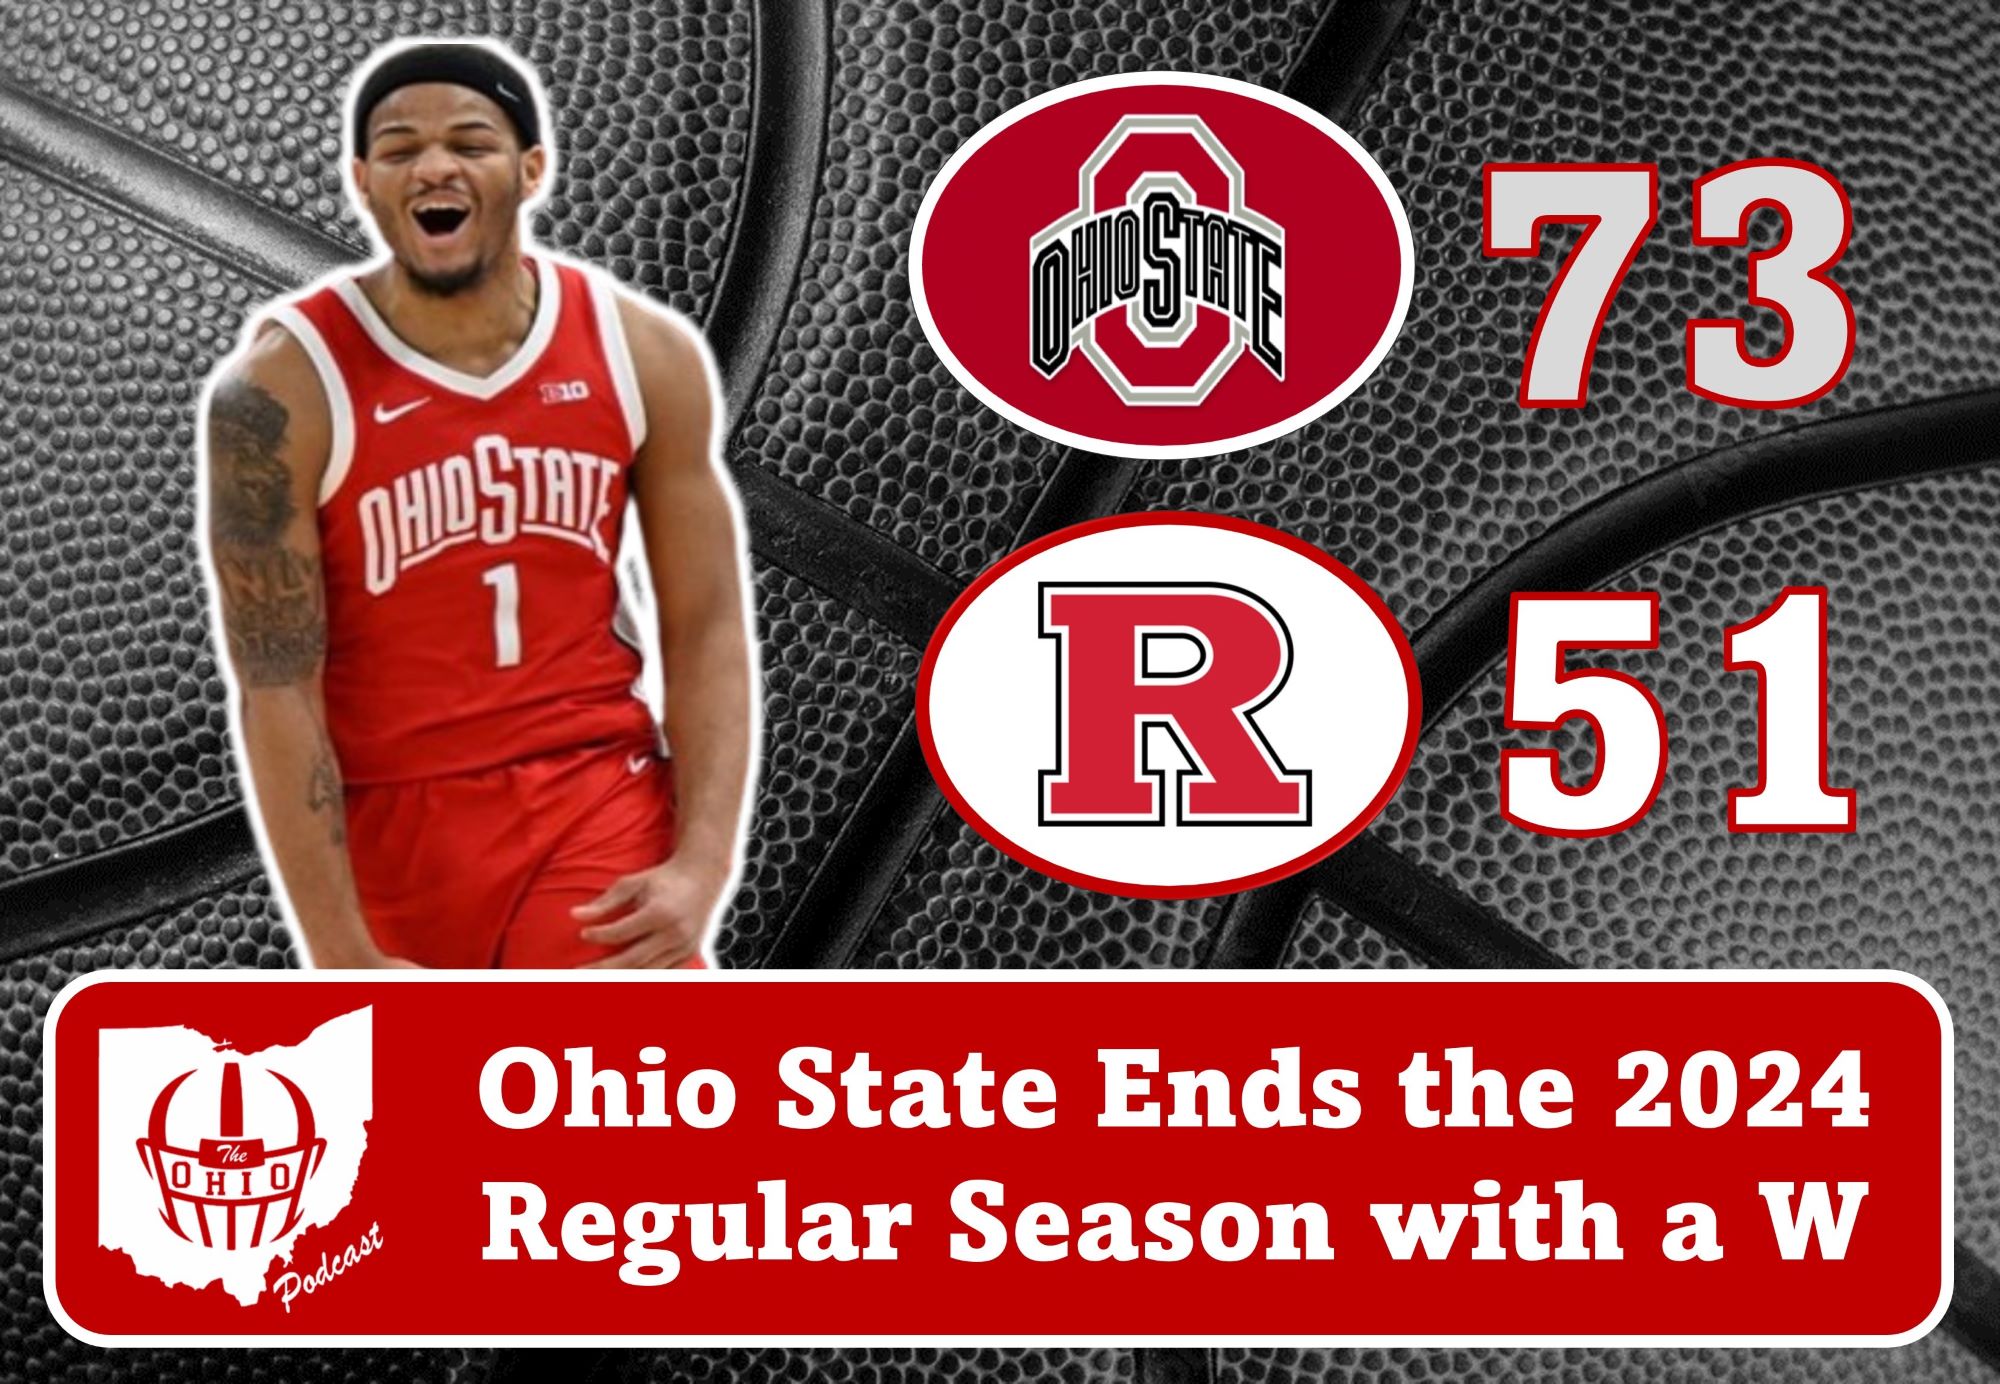 Ohio State Ends the 2024 Regular Season with a W.